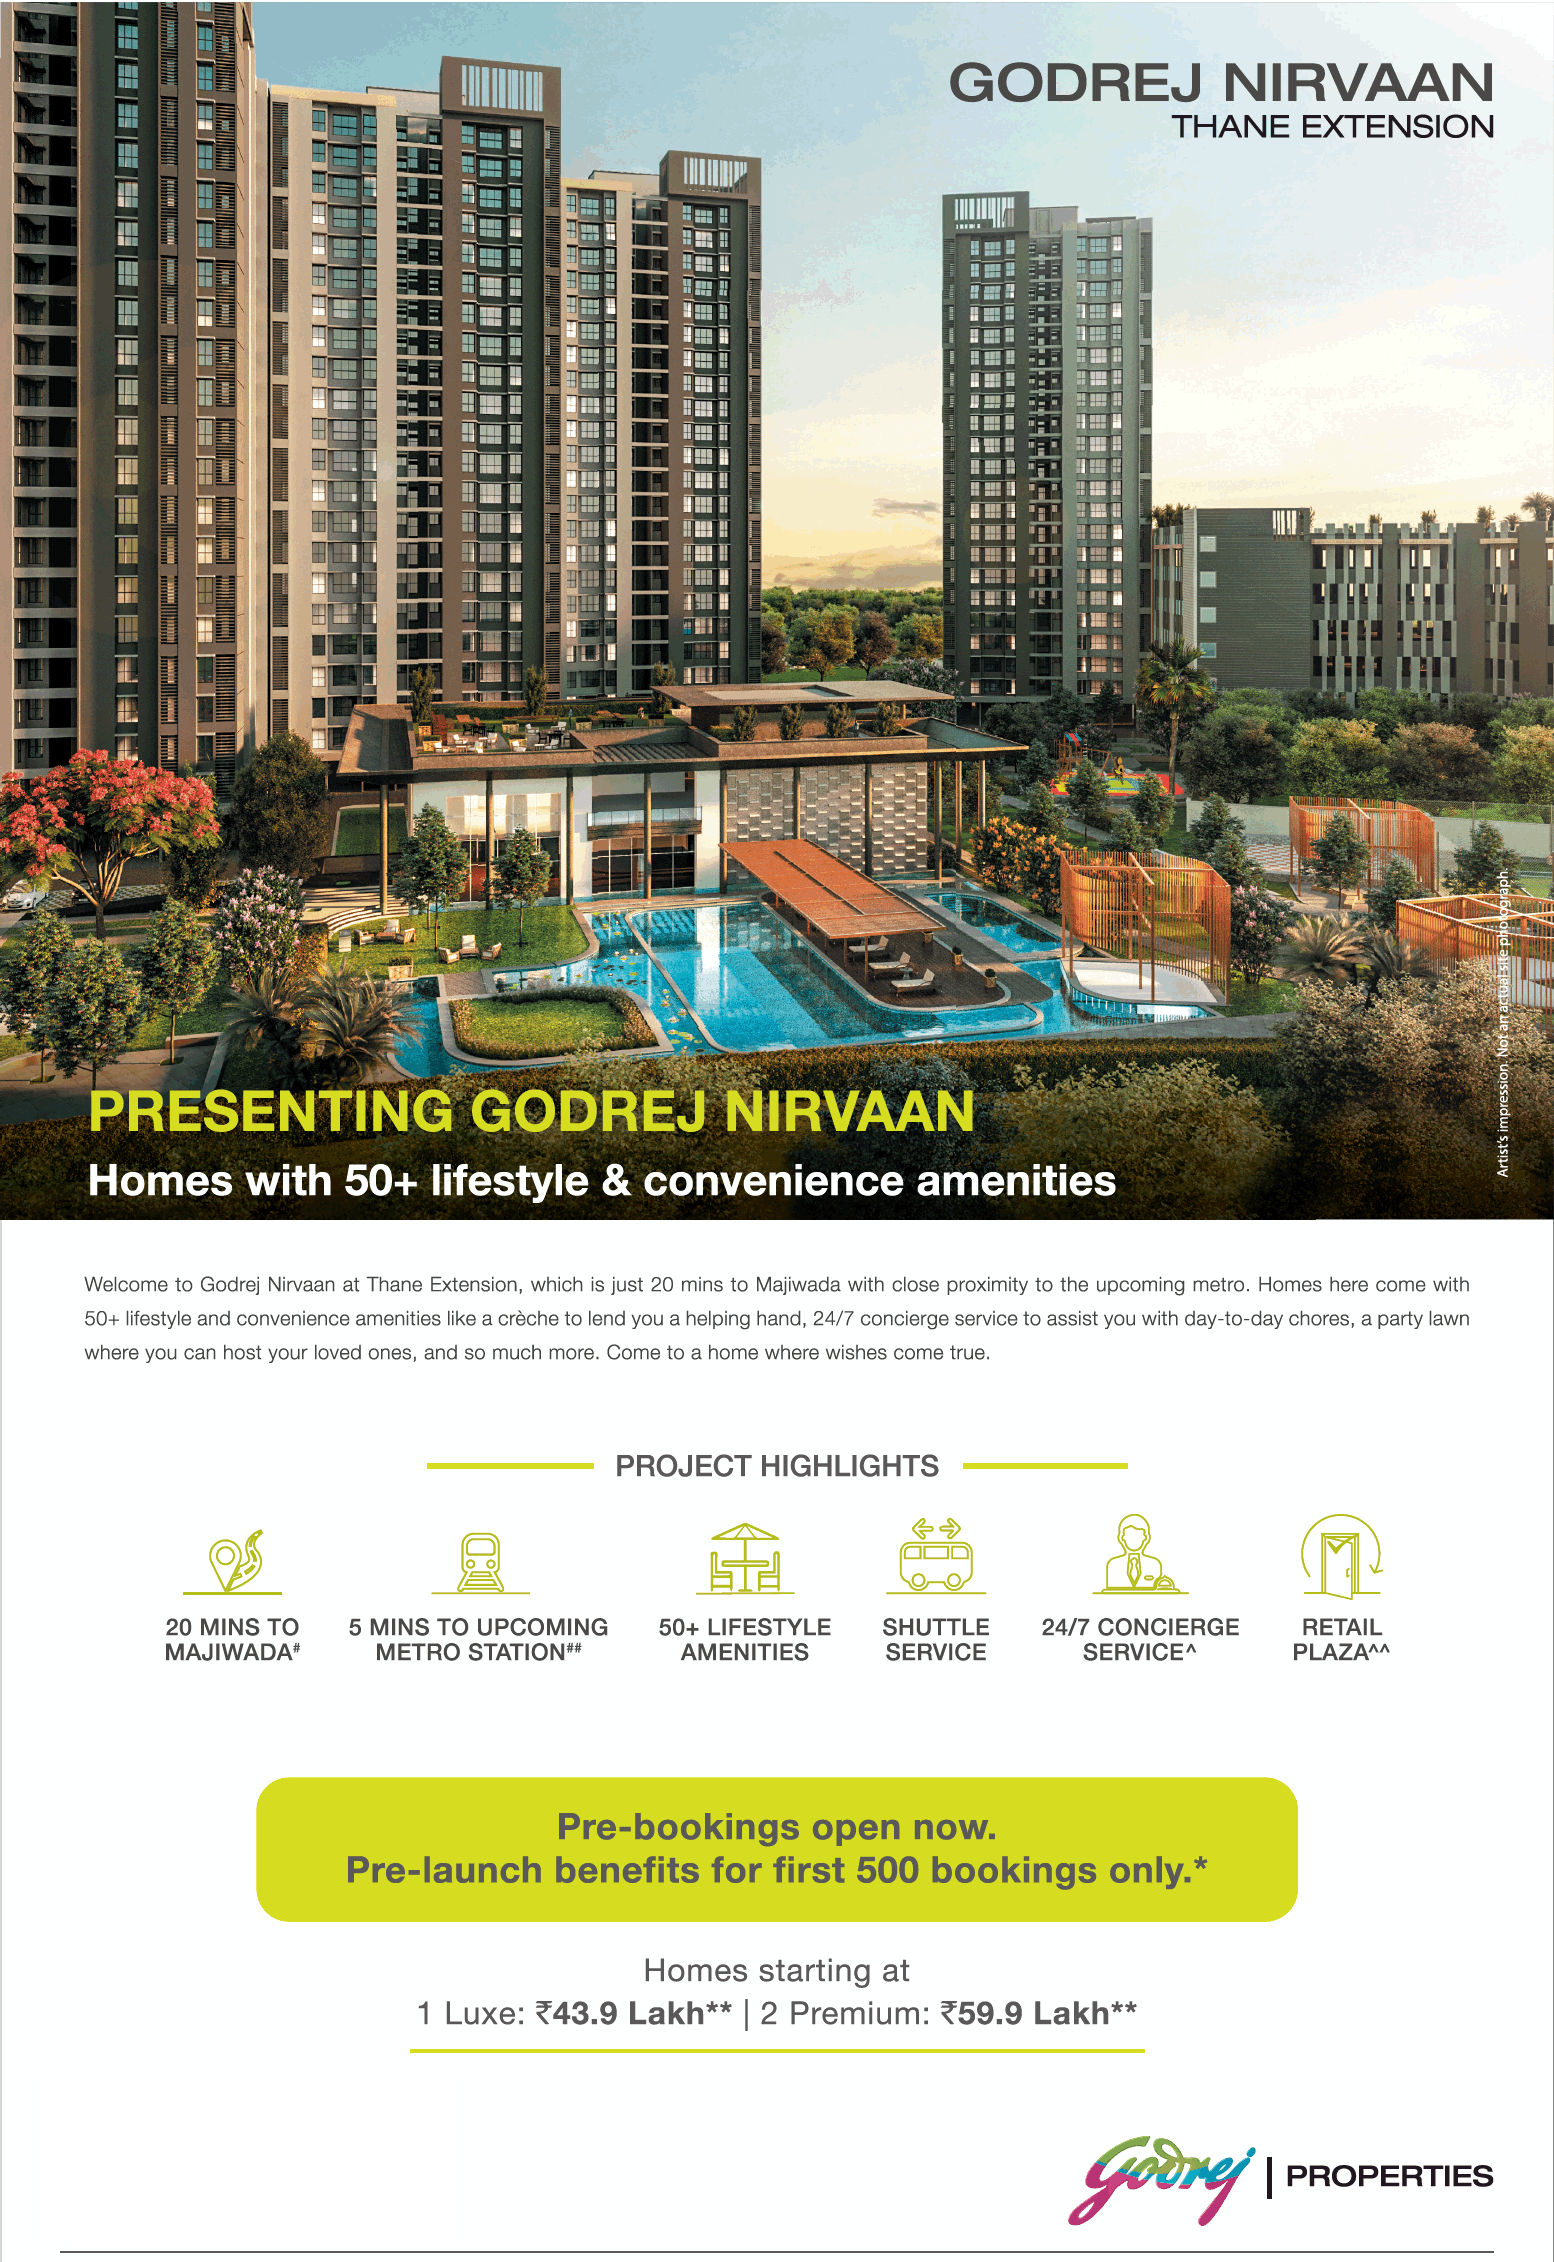 Presenting a lifestyle and convenience amenities at Godrej Nirvaan in Mumbai Update